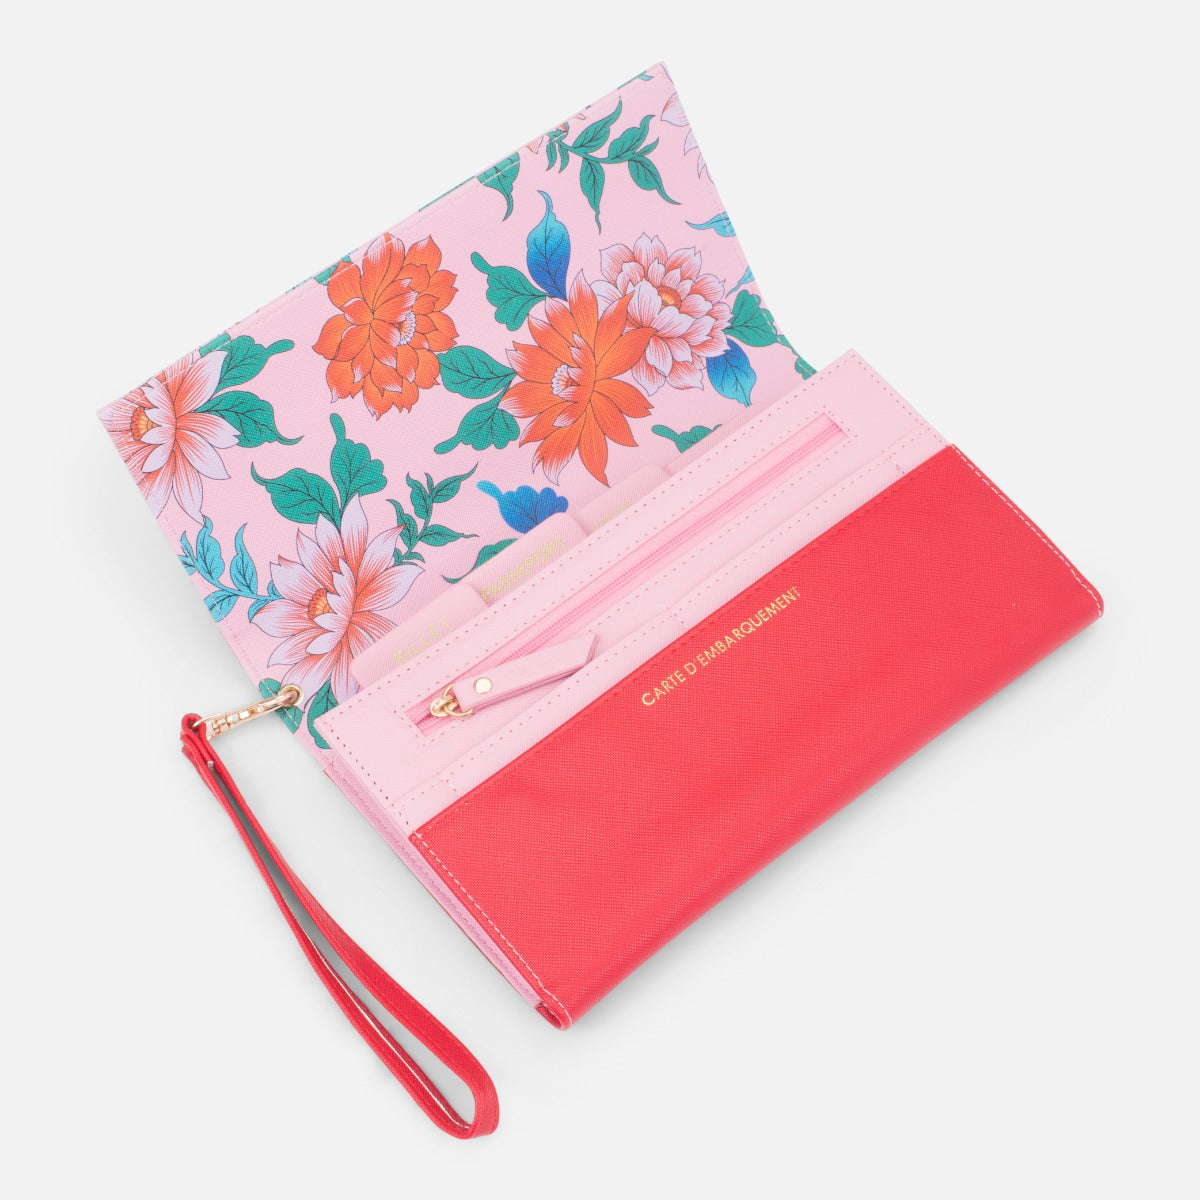 Travel documents holder with vintage flowers   